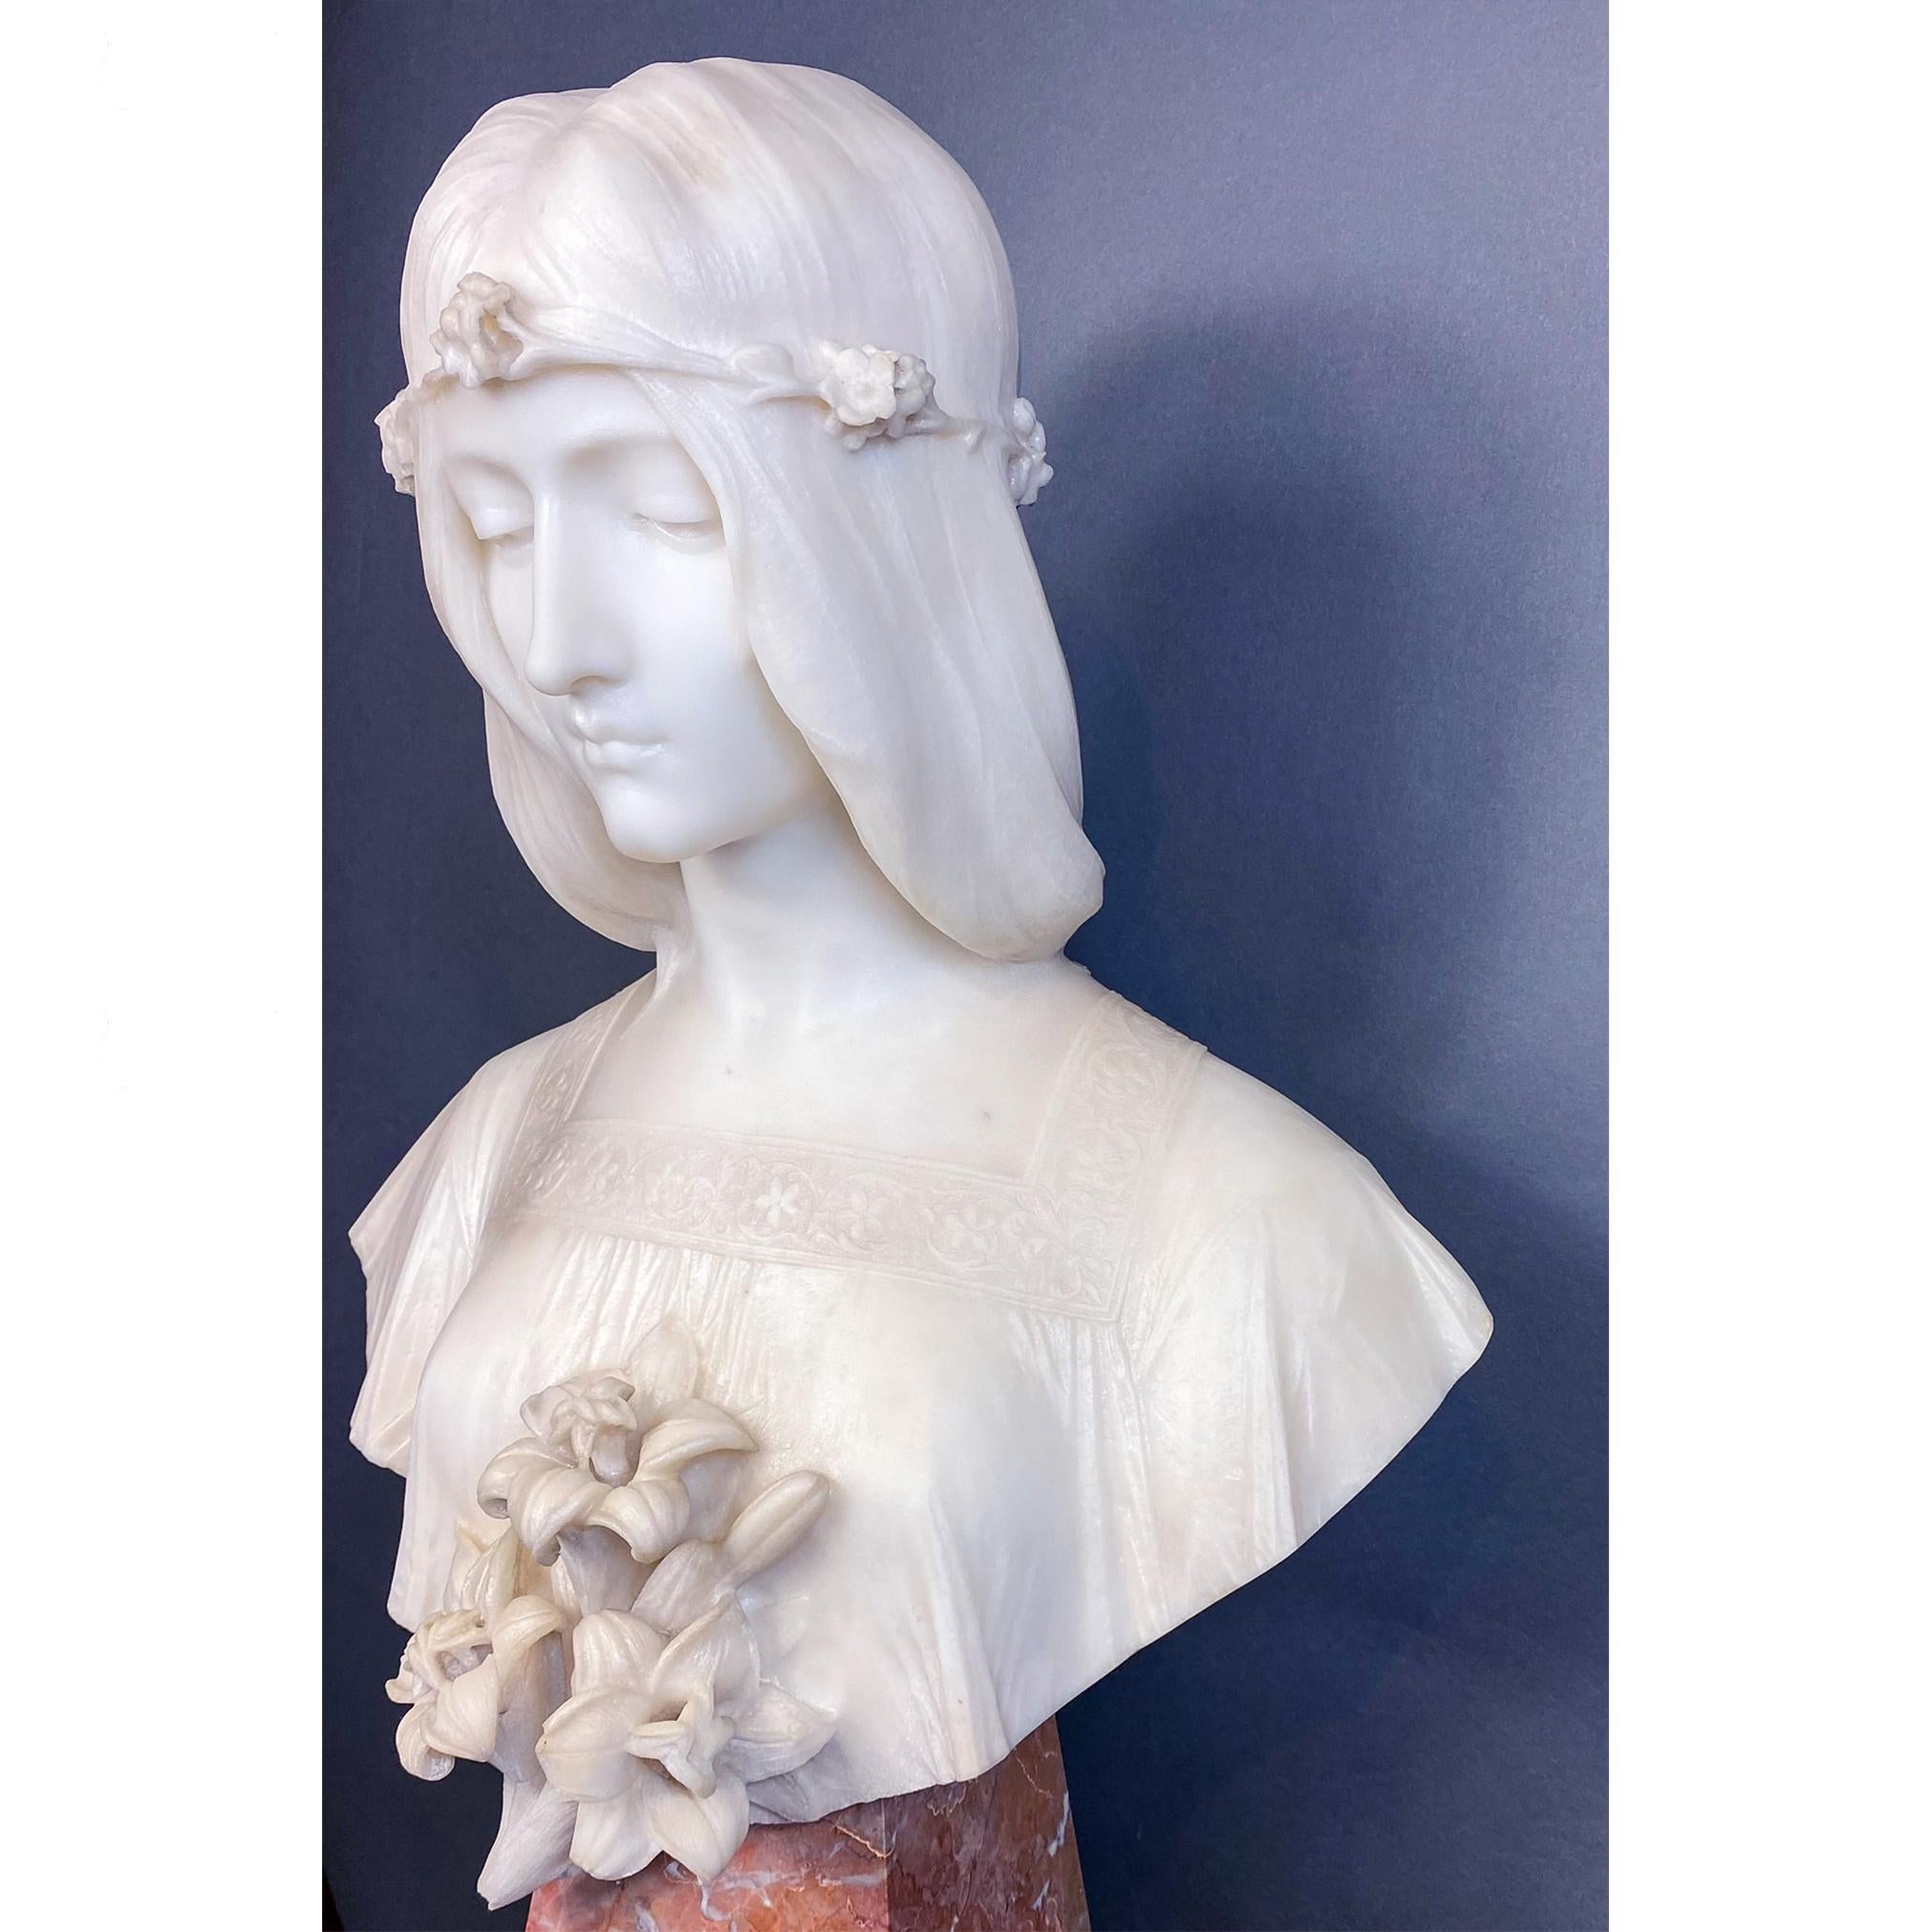 Beautiful female bust wearing embroidered square neckline top and flower crown. A bouquet of lilies adorn the front of the bust which sits on top of a tapered square marble base in a contrasting marble. Delicate drapery is skillfully modeled by